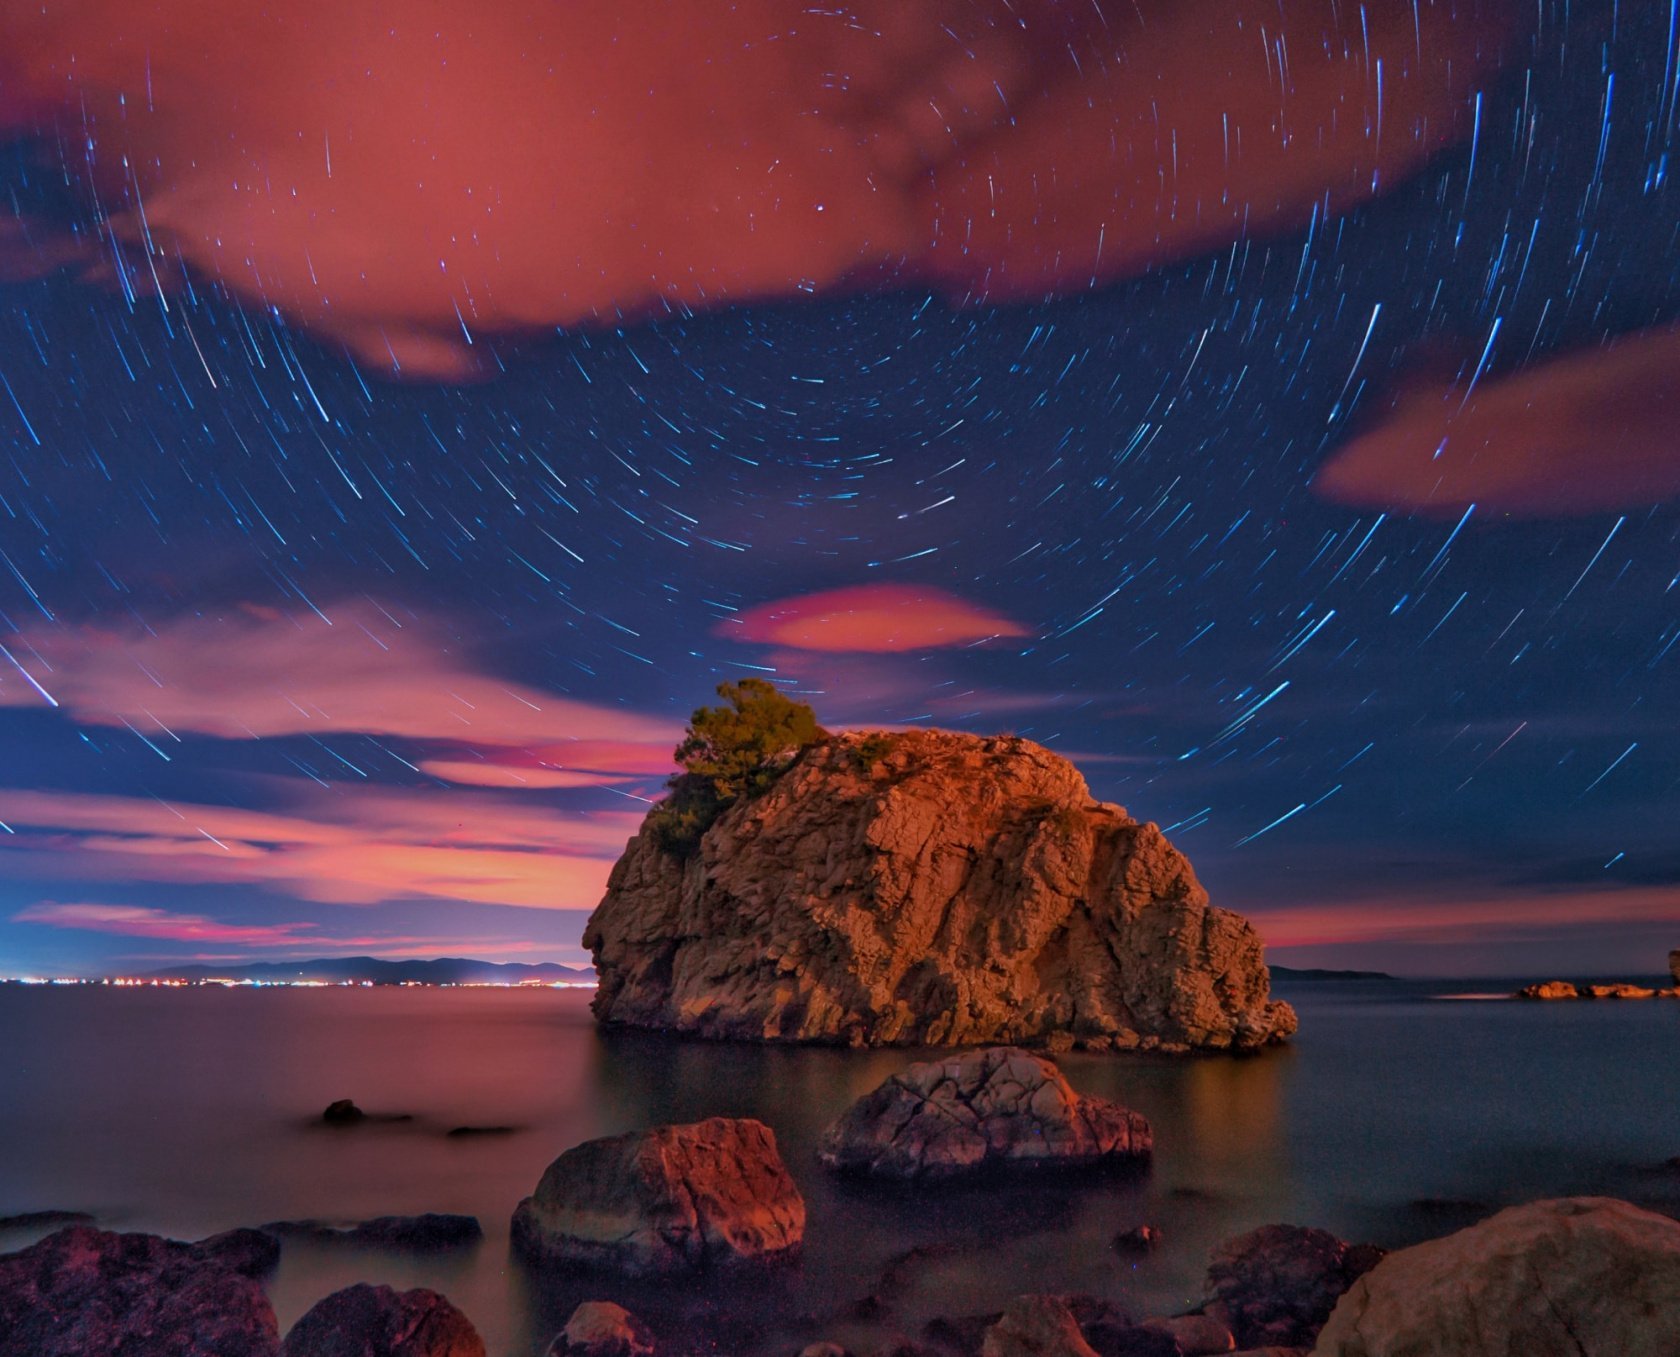 Astrophotography 101: Start Shooting Your Favorite Stars Image6